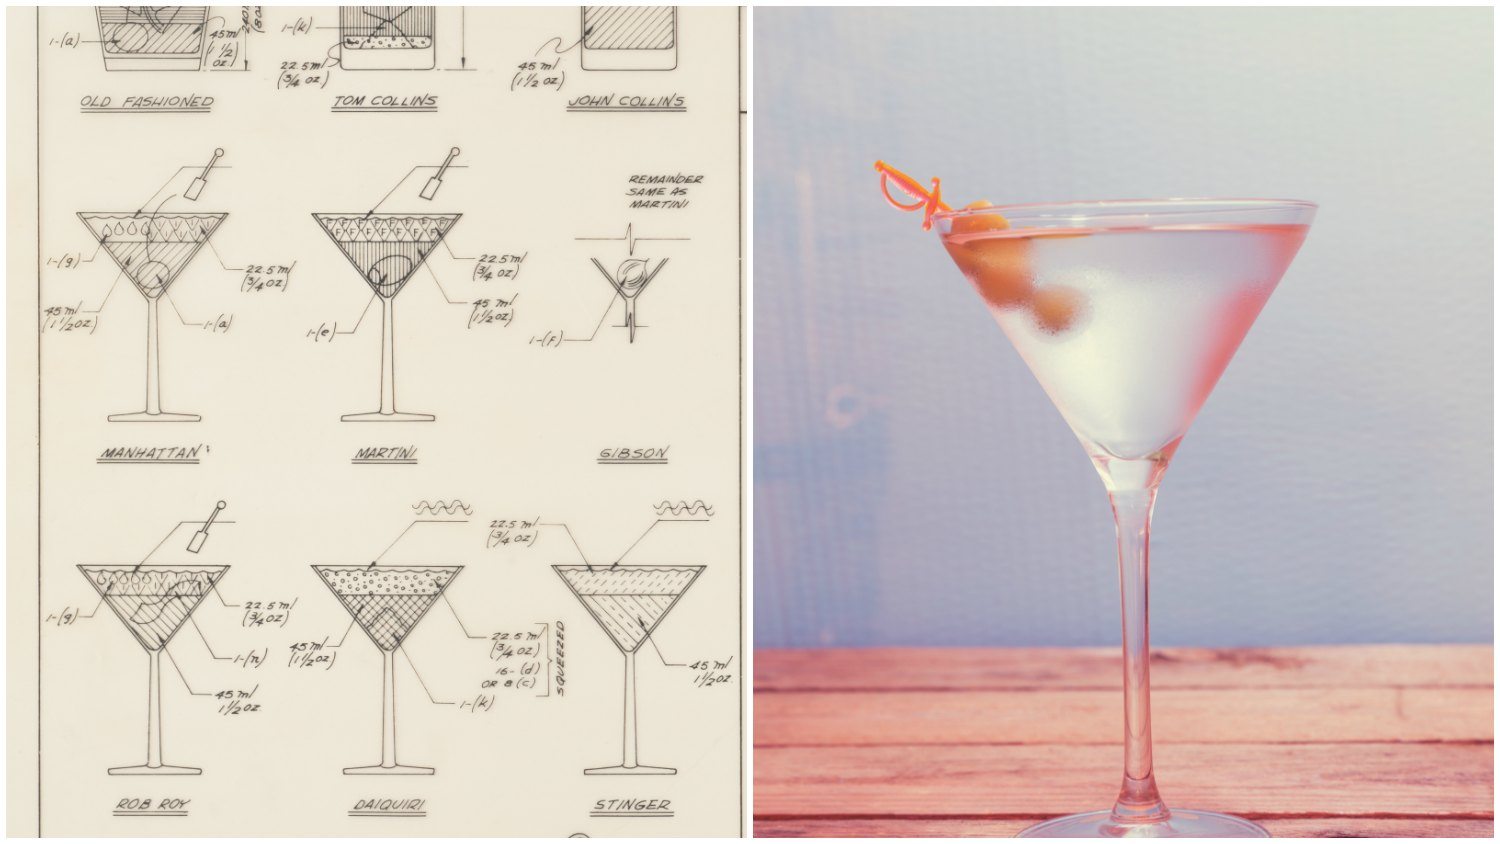 National Archives Cocktail Construction Chart